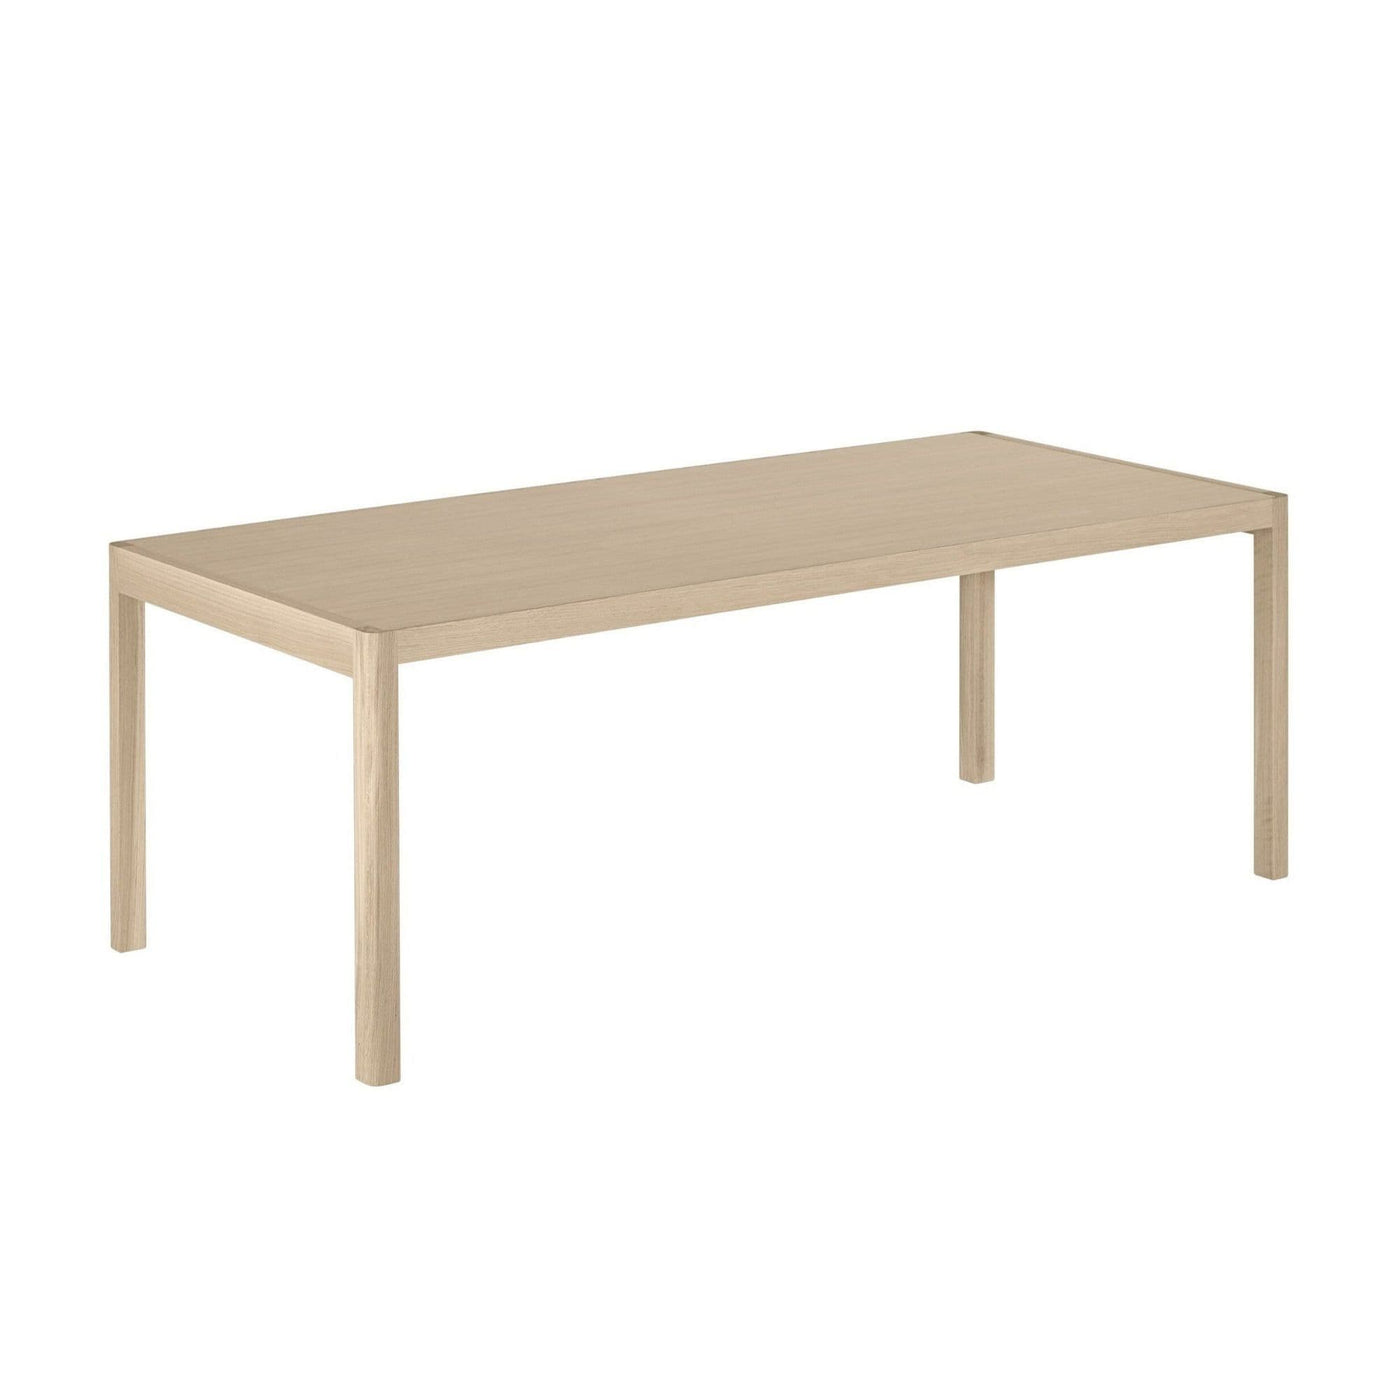 Muuto Workshop Table 92x200 in oak. Shop online at someday designs. #size_92x200